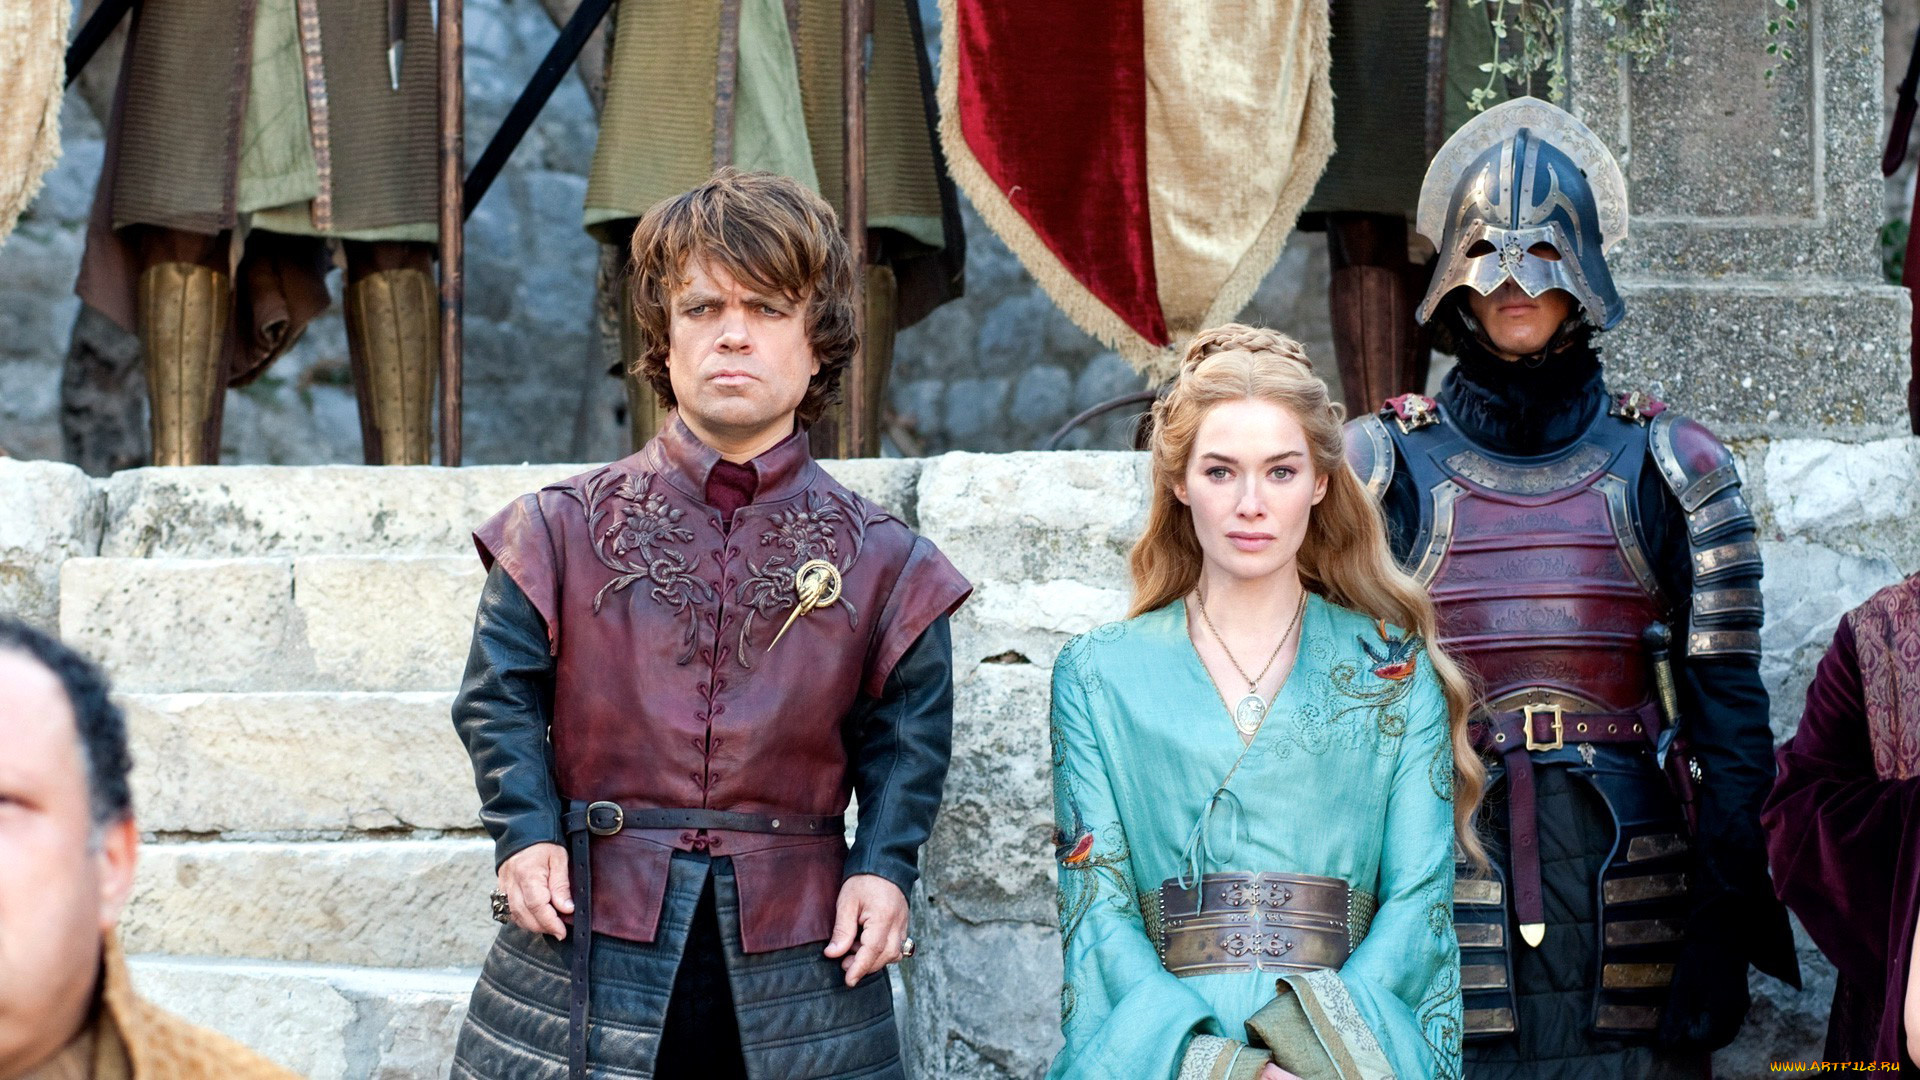  , game of thrones , , tyrion, lannister, cersei